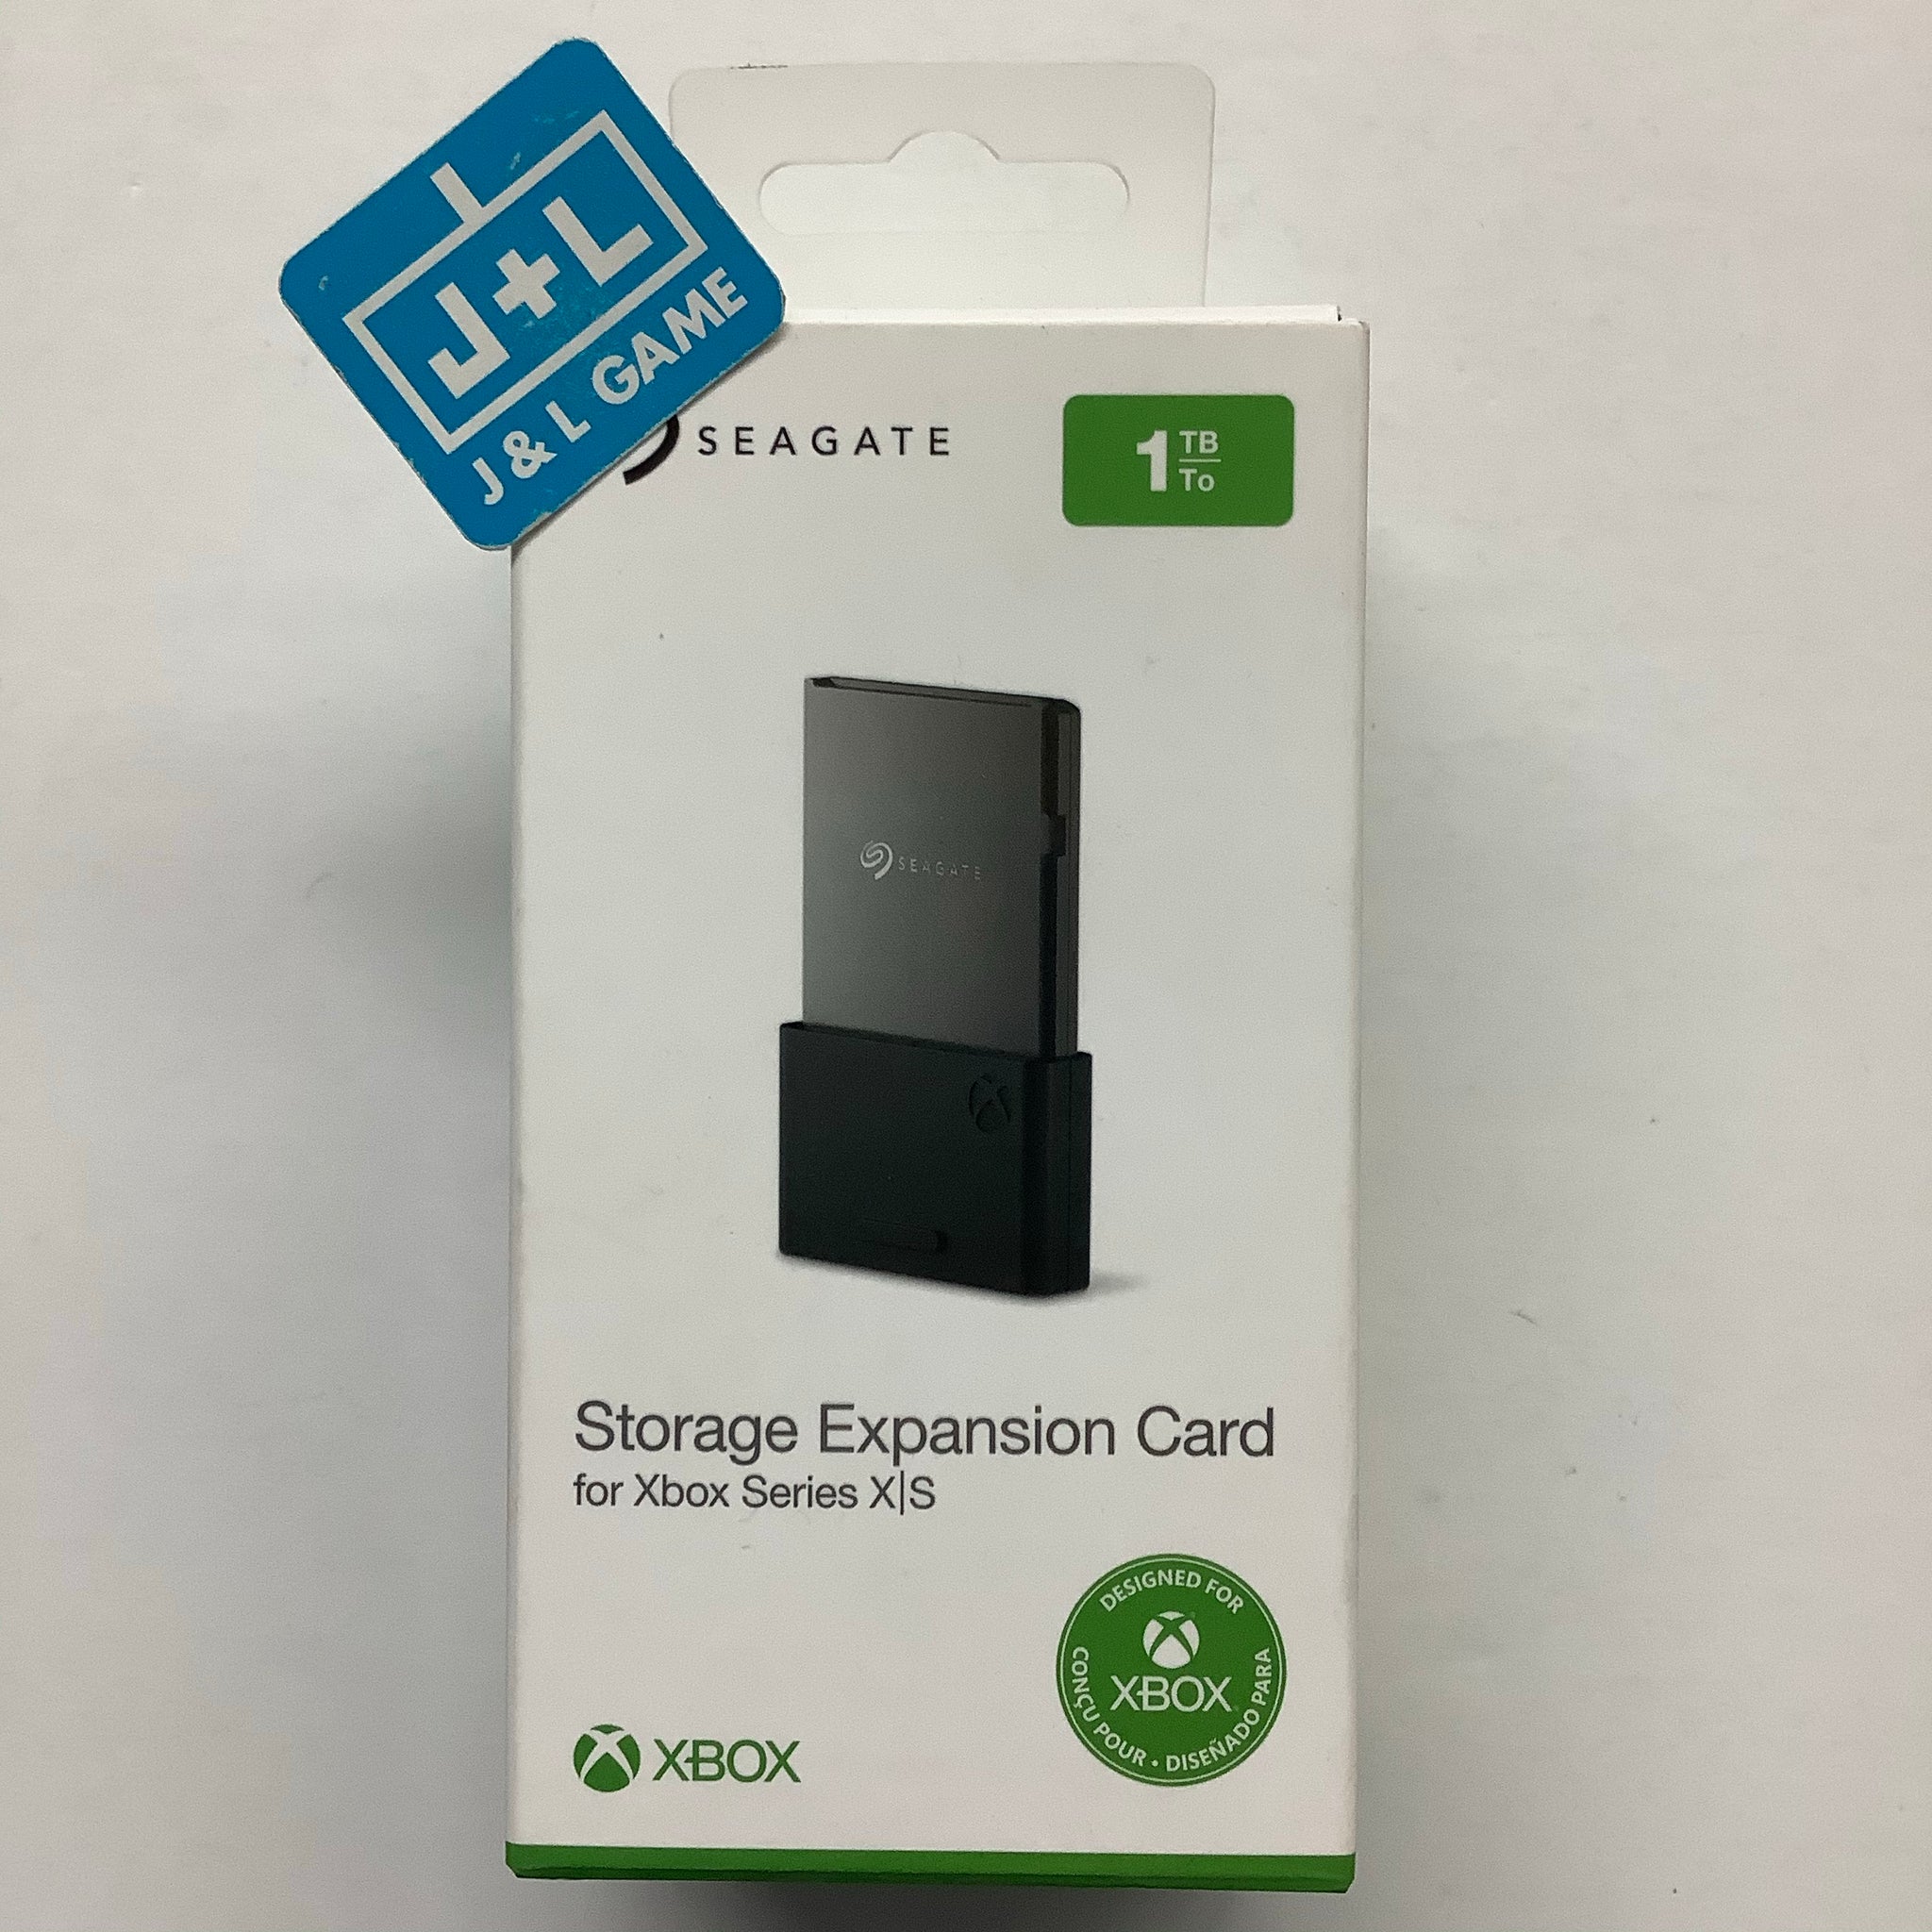 Seagate Storage Expansion Card for Xbox Series X|S 1TB Solid State Drive - NVMe Expansion SSD - (XSX) Xbox Series X|S ACCESSORIES Seagate   